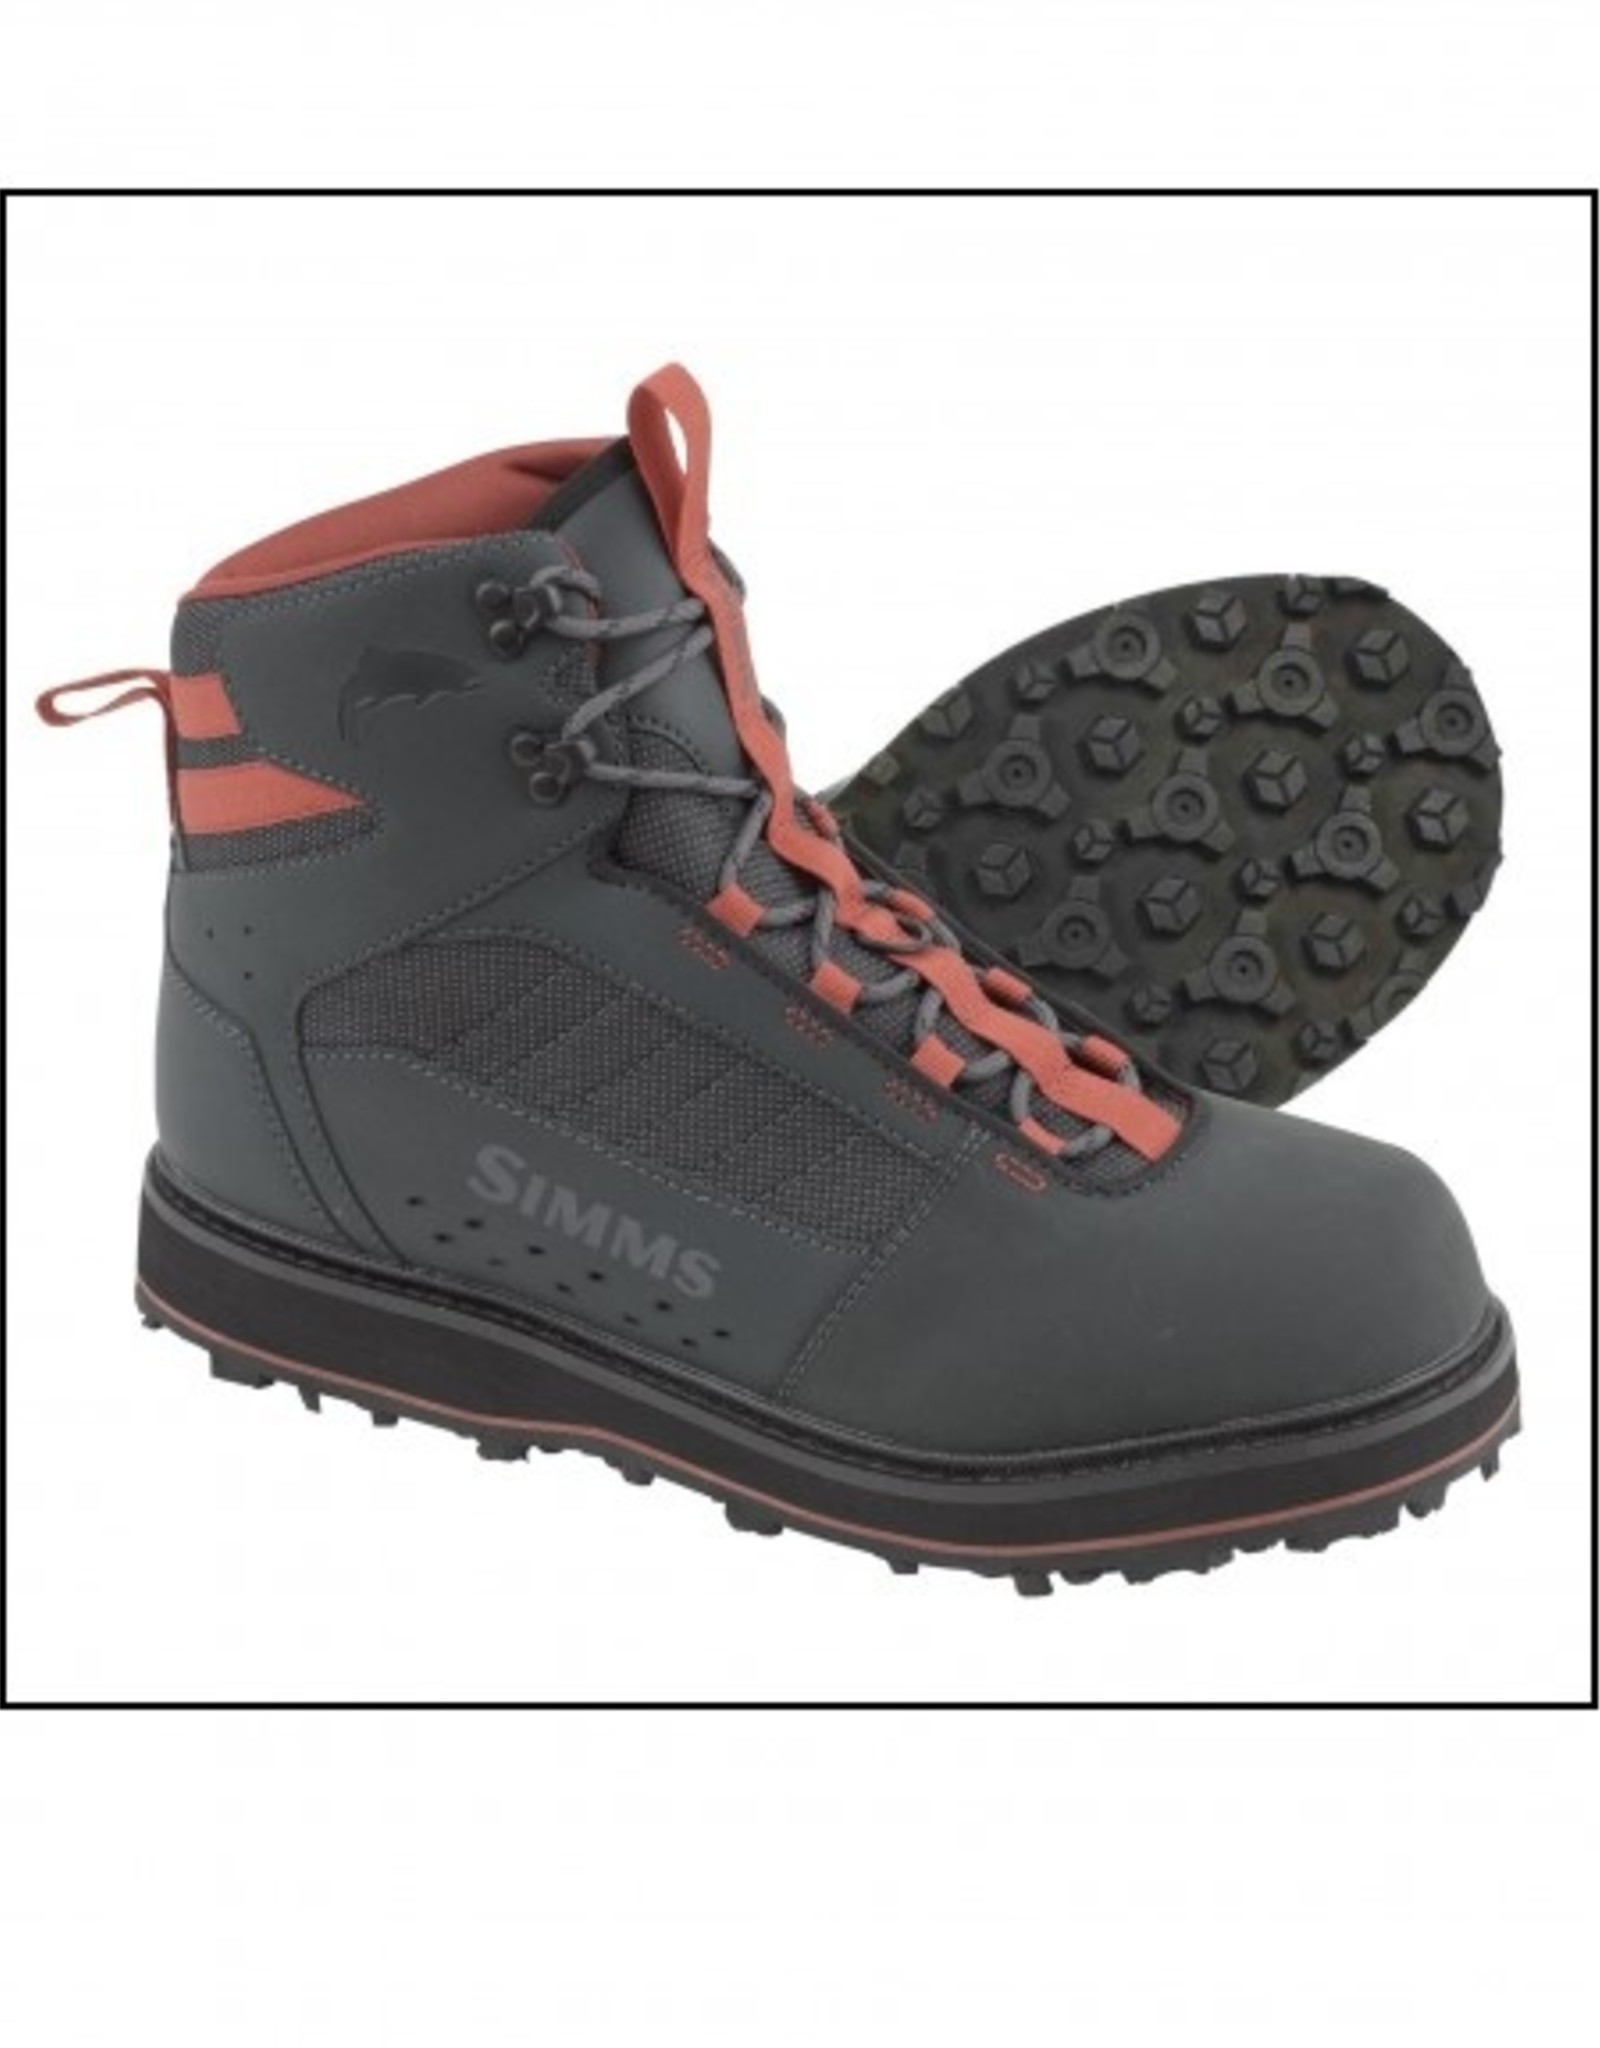 Simms Fishing DISCONTINUED M'S TRIBUTARY BOOT